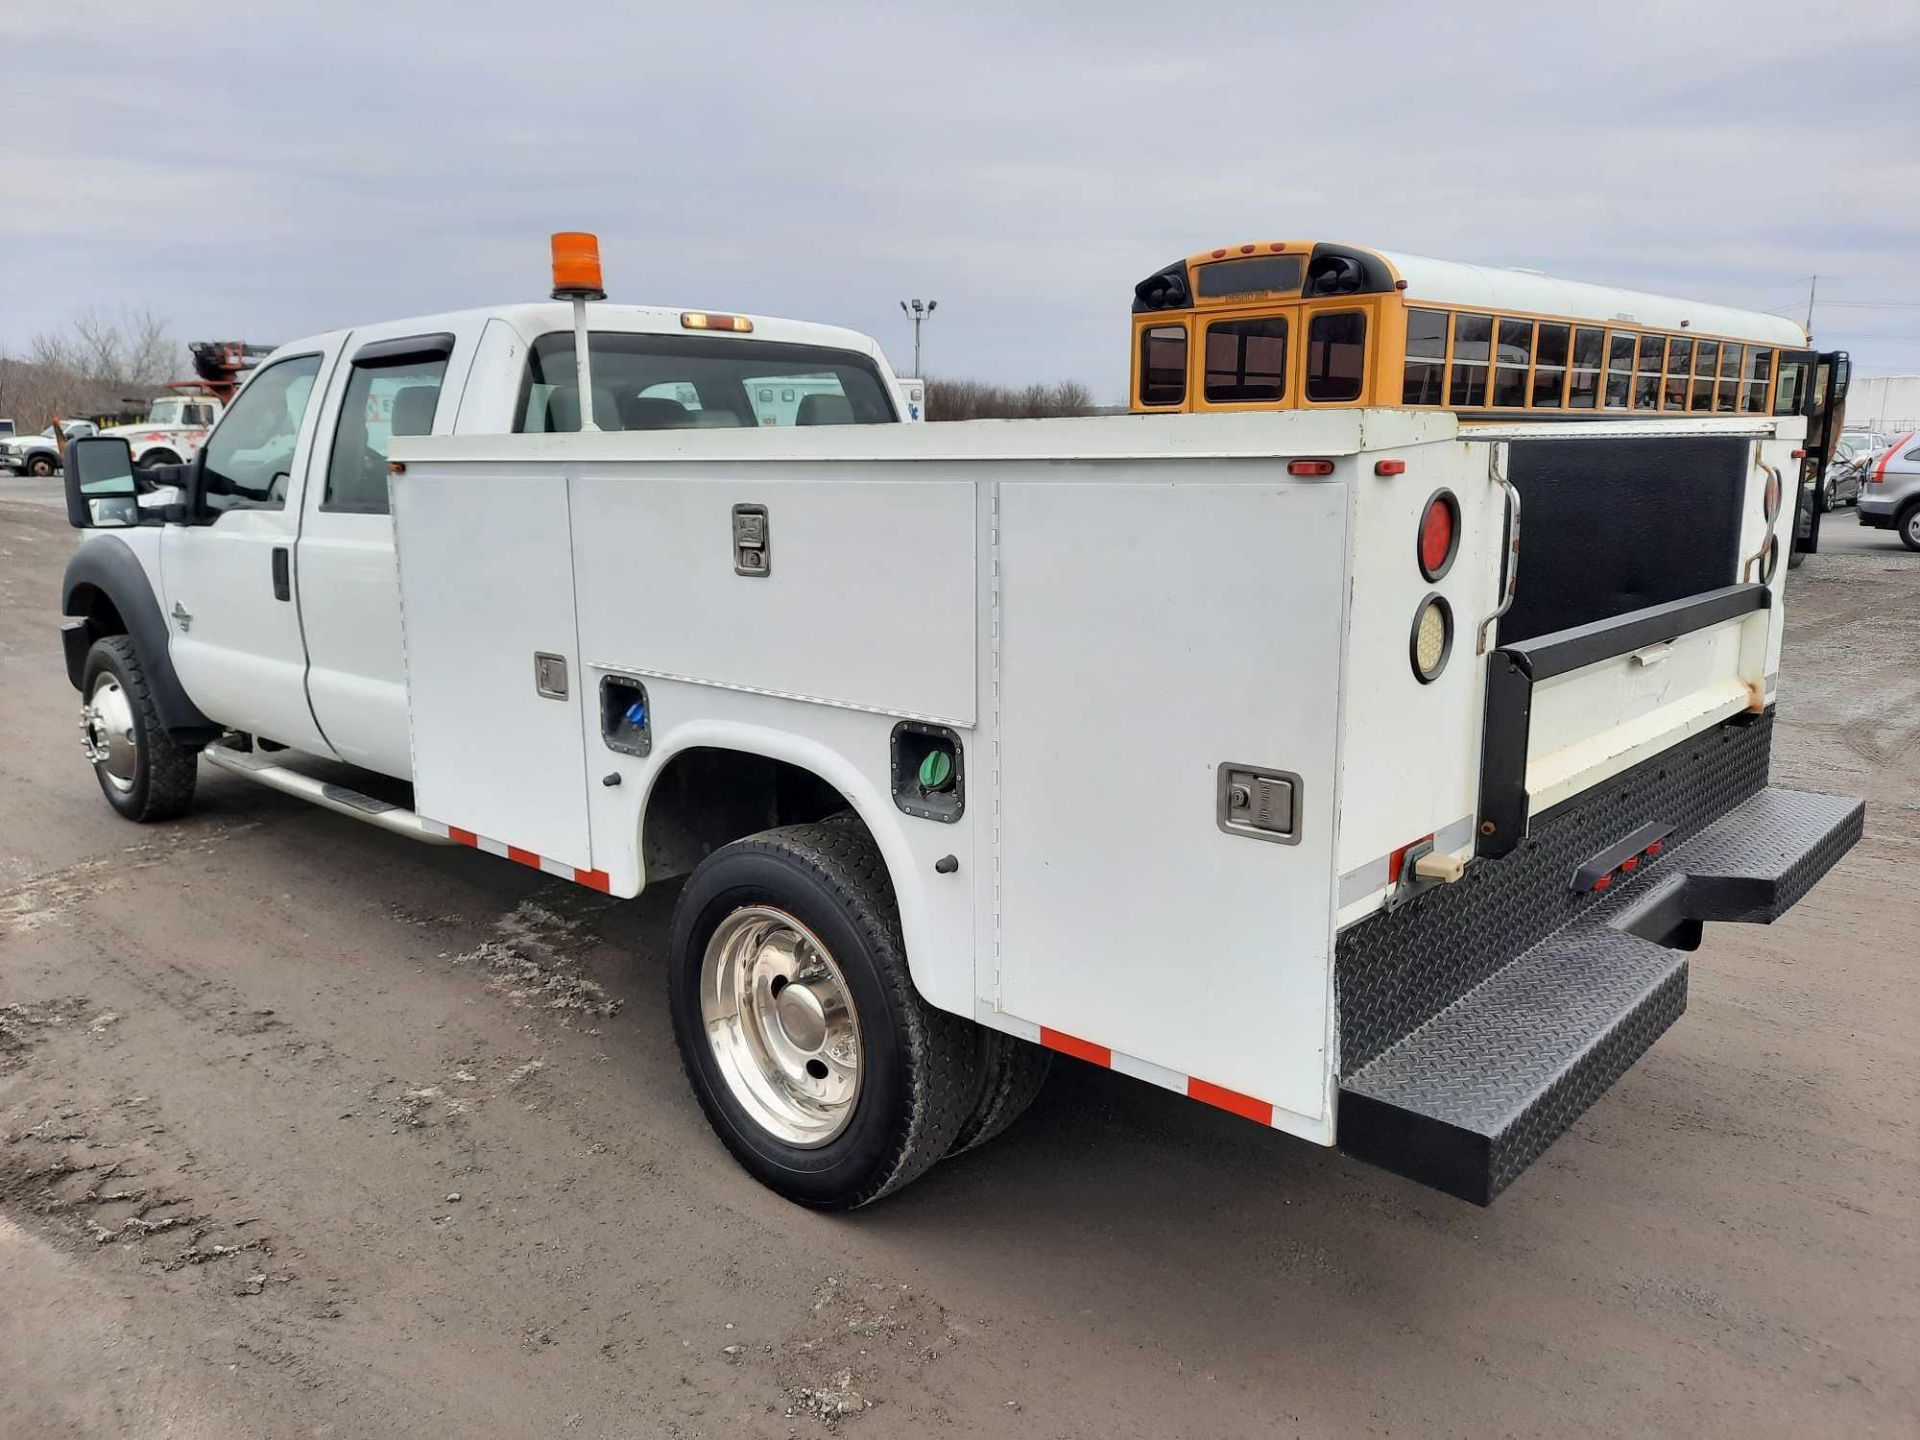 2011 FORD F450 DUALLY 4X4 SERVICE TRUCK - Image 2 of 27